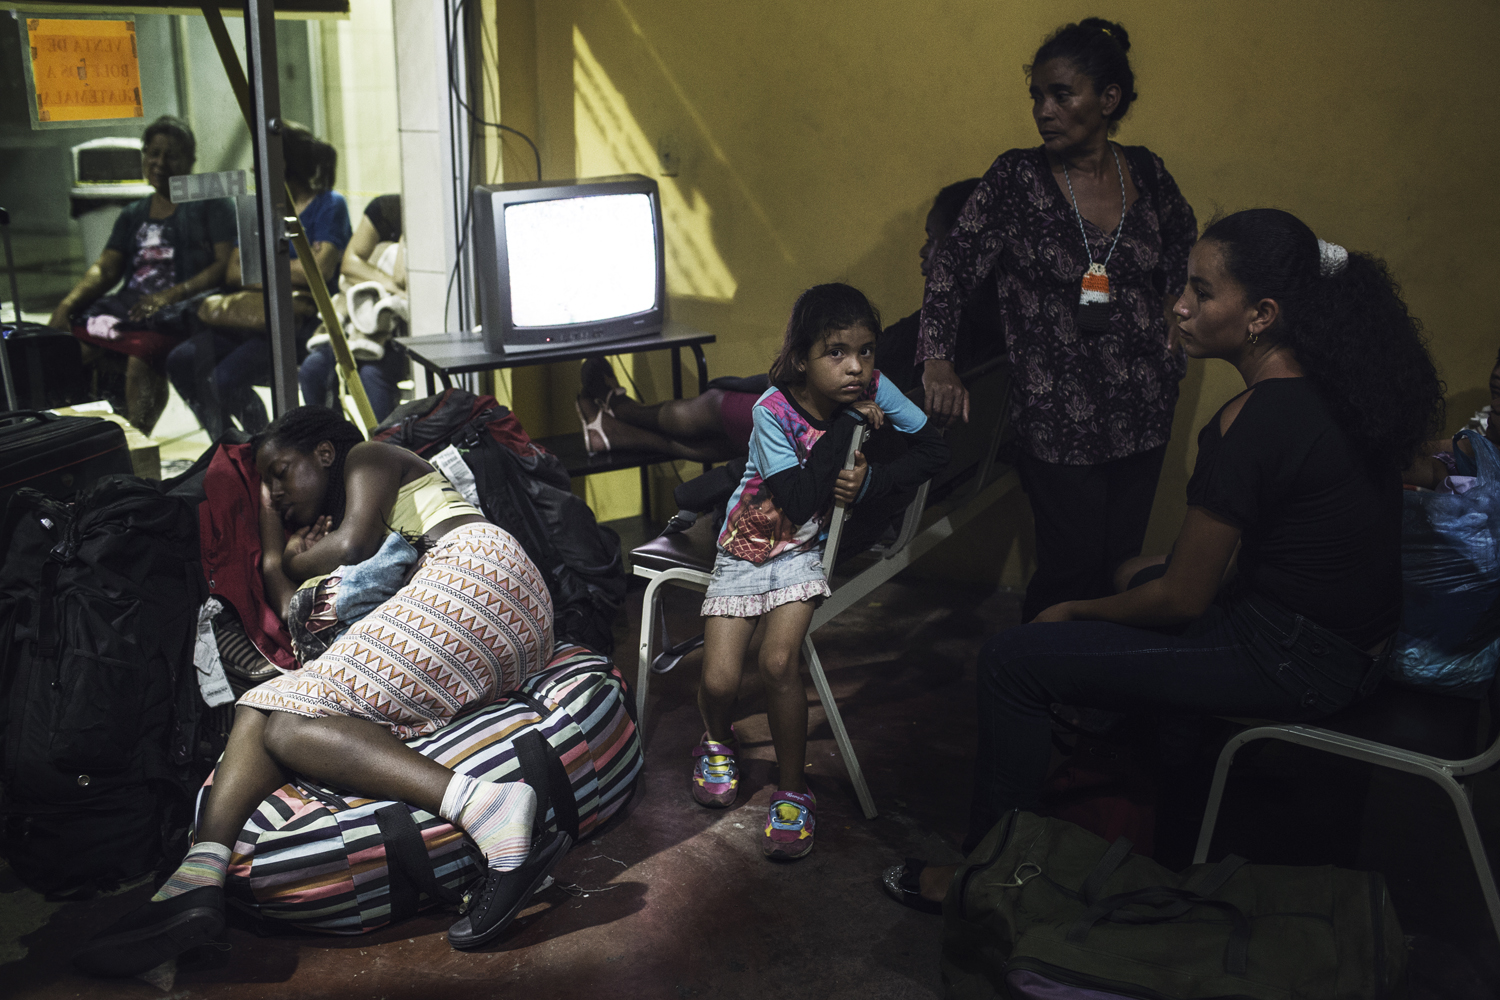 Exhaustion is the prevailing mood among departing migrants at the bus terminal in San Pedro Sula. The space is a hub for people aiming north. Honduras. July 15, 2014.